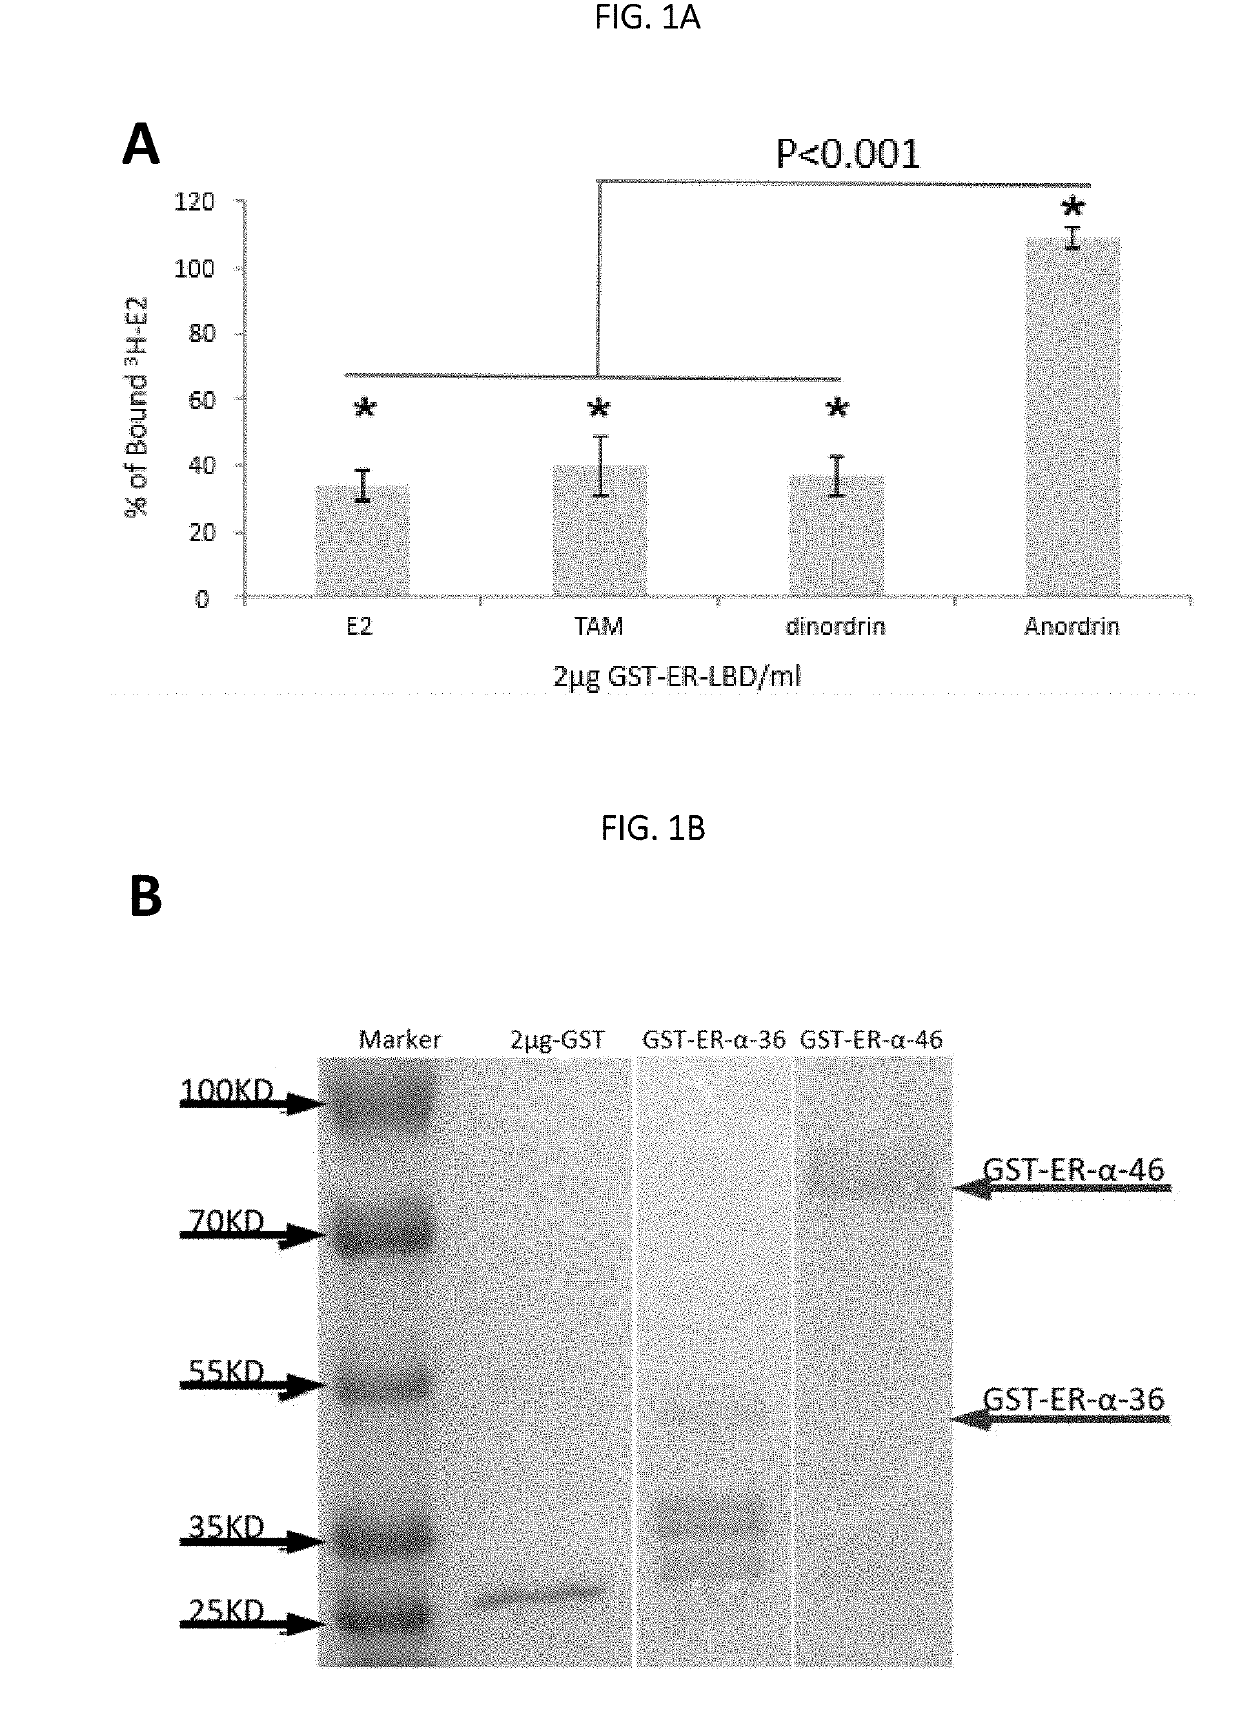 Anordrin compositions and methods for treating diseases